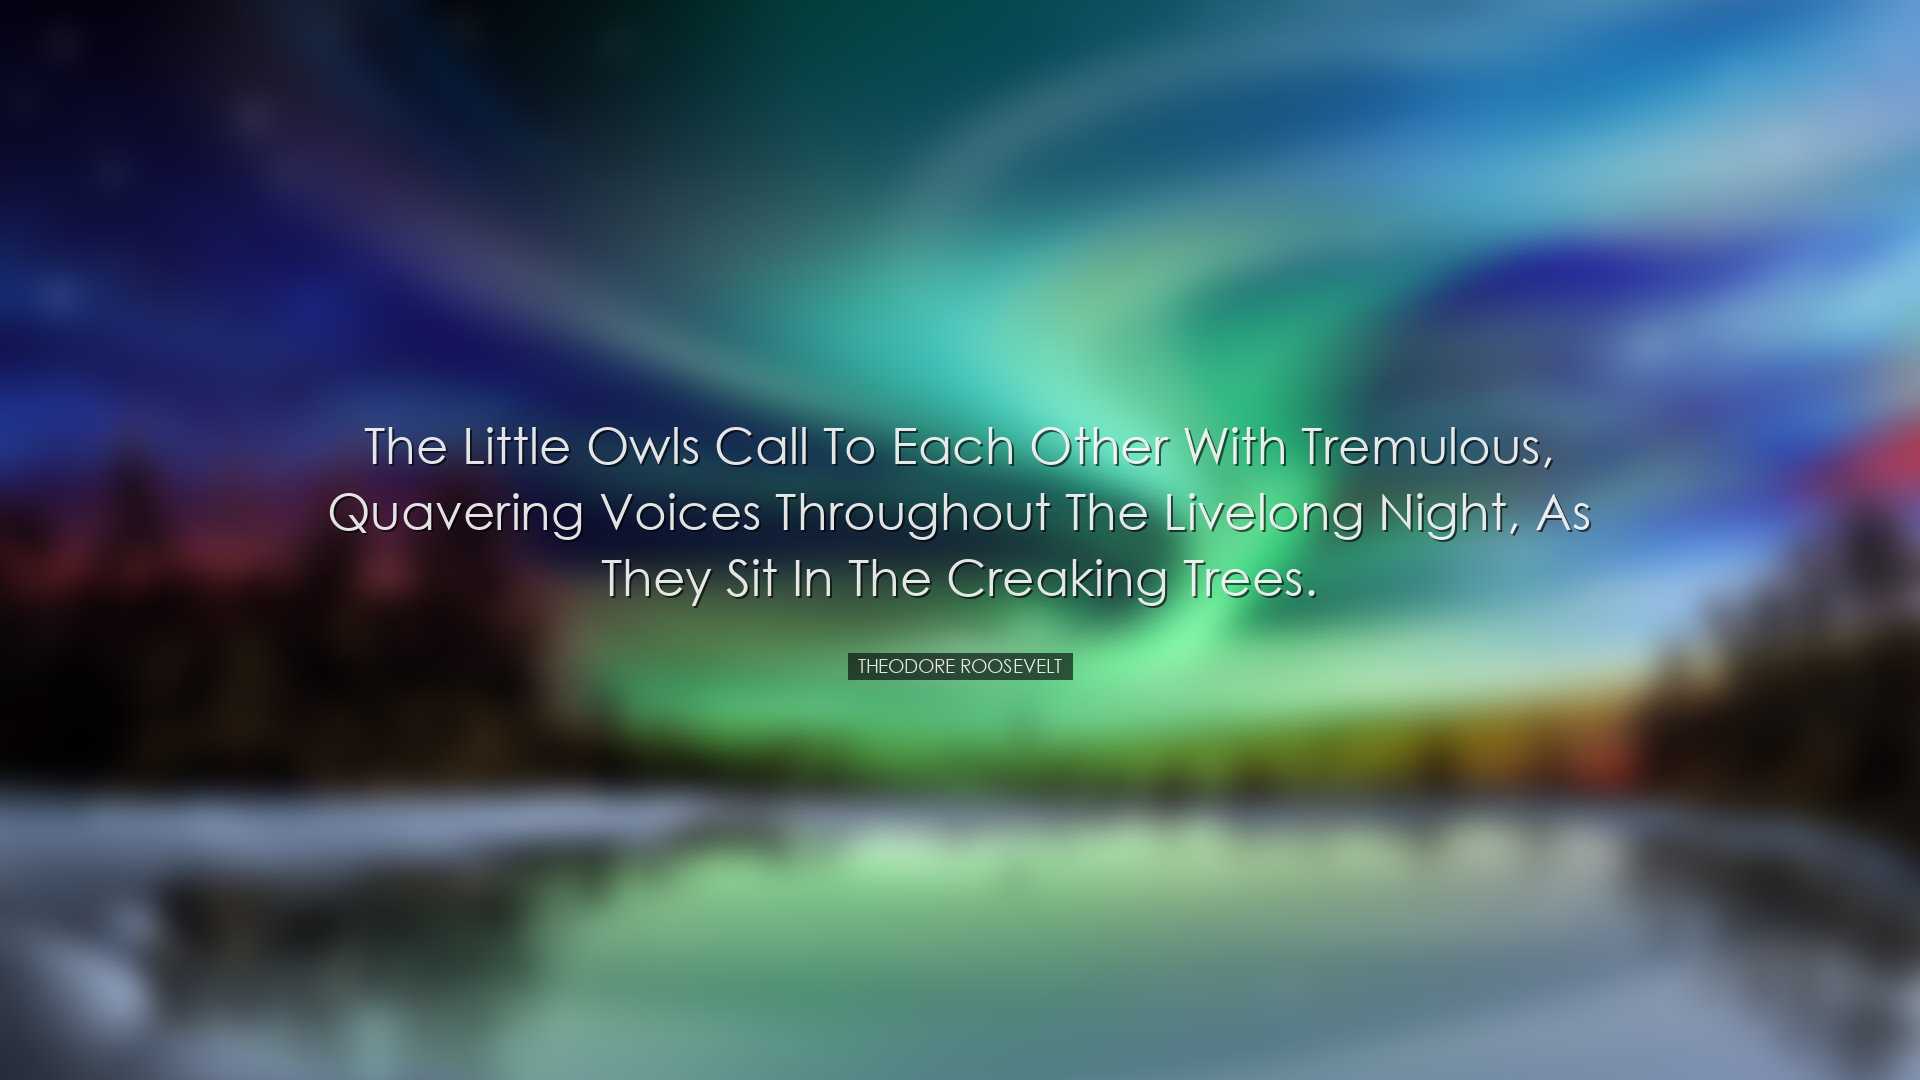 The little owls call to each other with tremulous, quavering voice